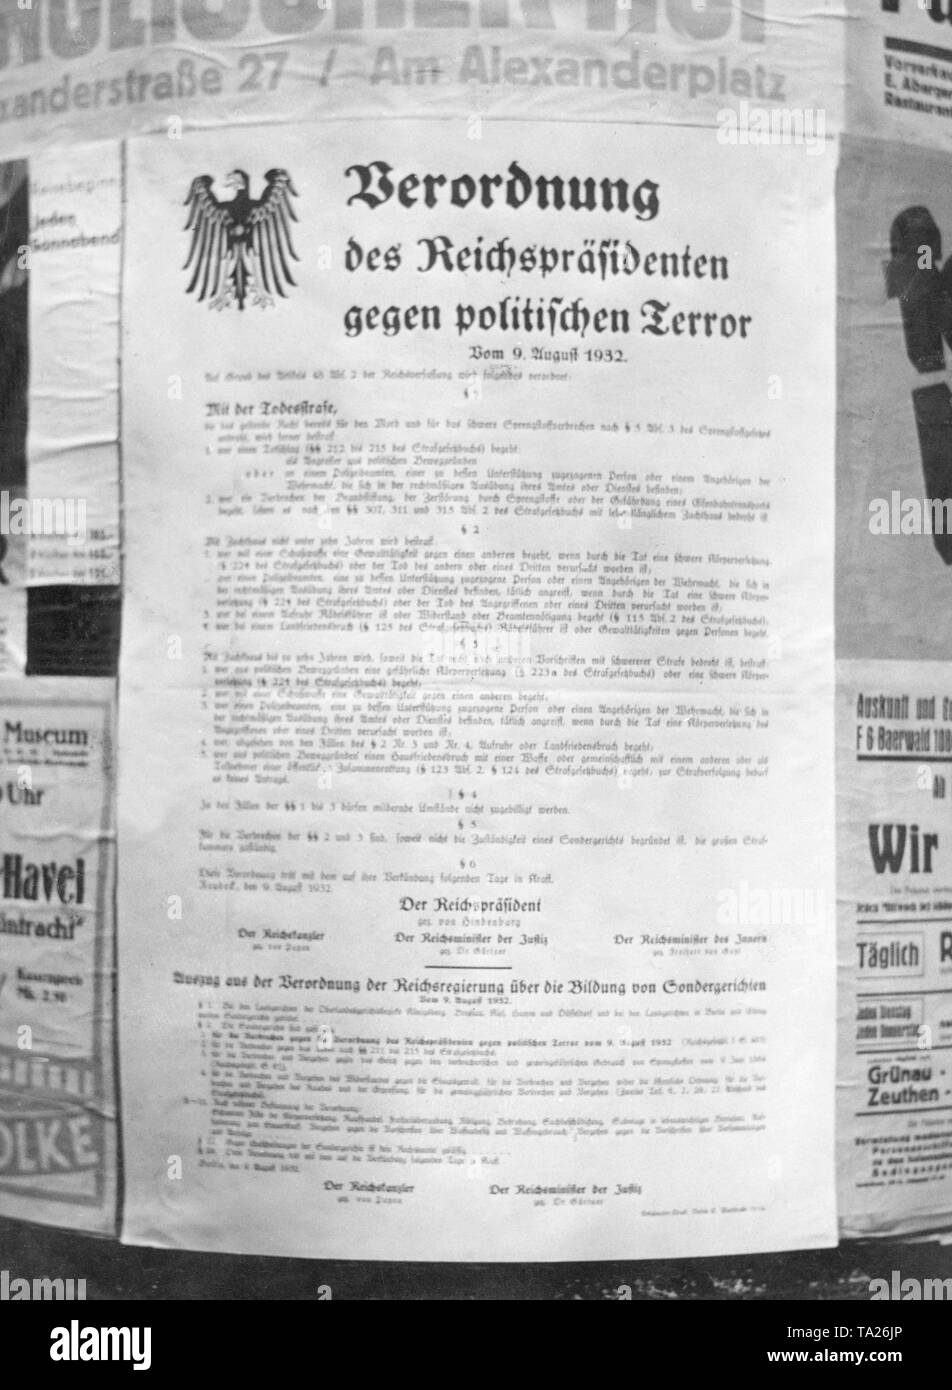 On August 9, 1932, a notice informs the public that the national government under Chancellor Franz von Papen has adopted a regulation against political terror. The death penalty was introduced because of the heavy road battles and civil war-like conditions, use of explosives and political murders. Stock Photo